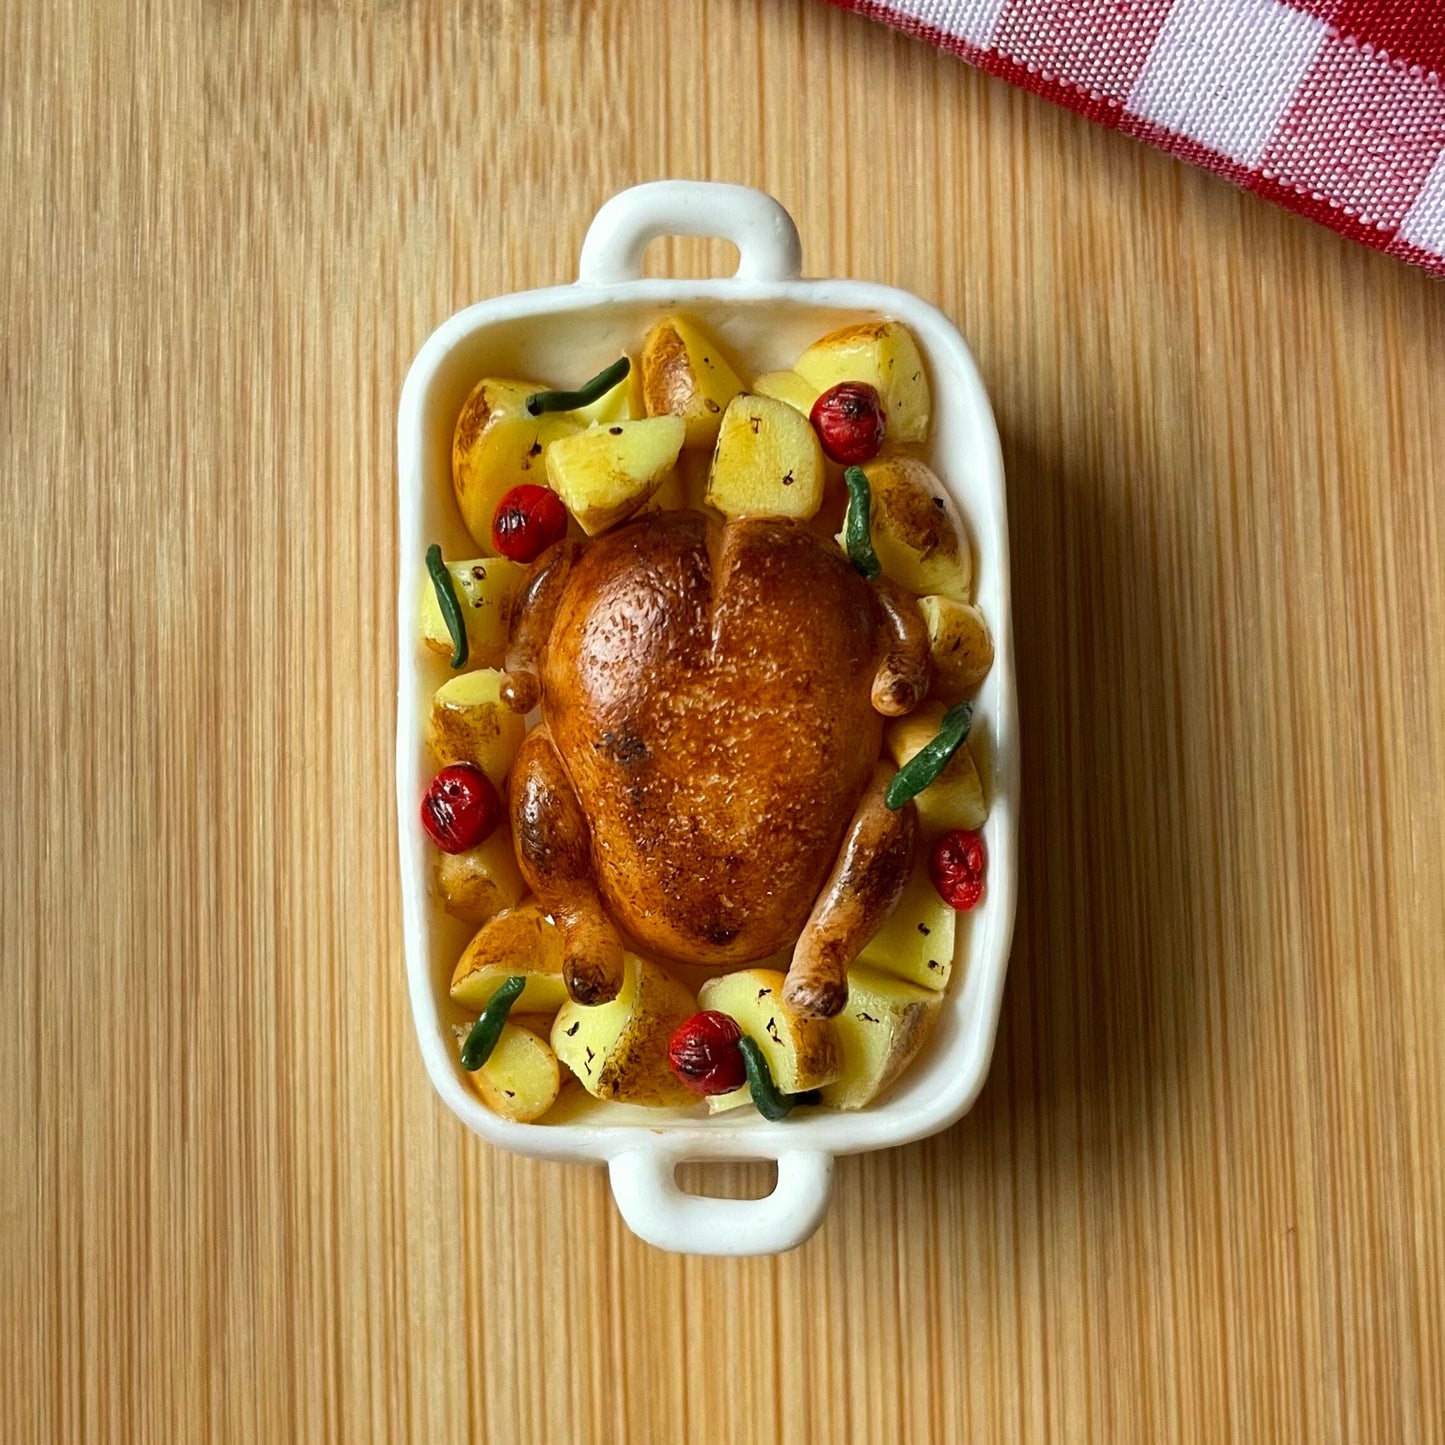 Food magnet - Roast chicken with baked potatoes, fridge magnets, memo board magnets, roast chicken magnets,clay magnets, baked chicken magne